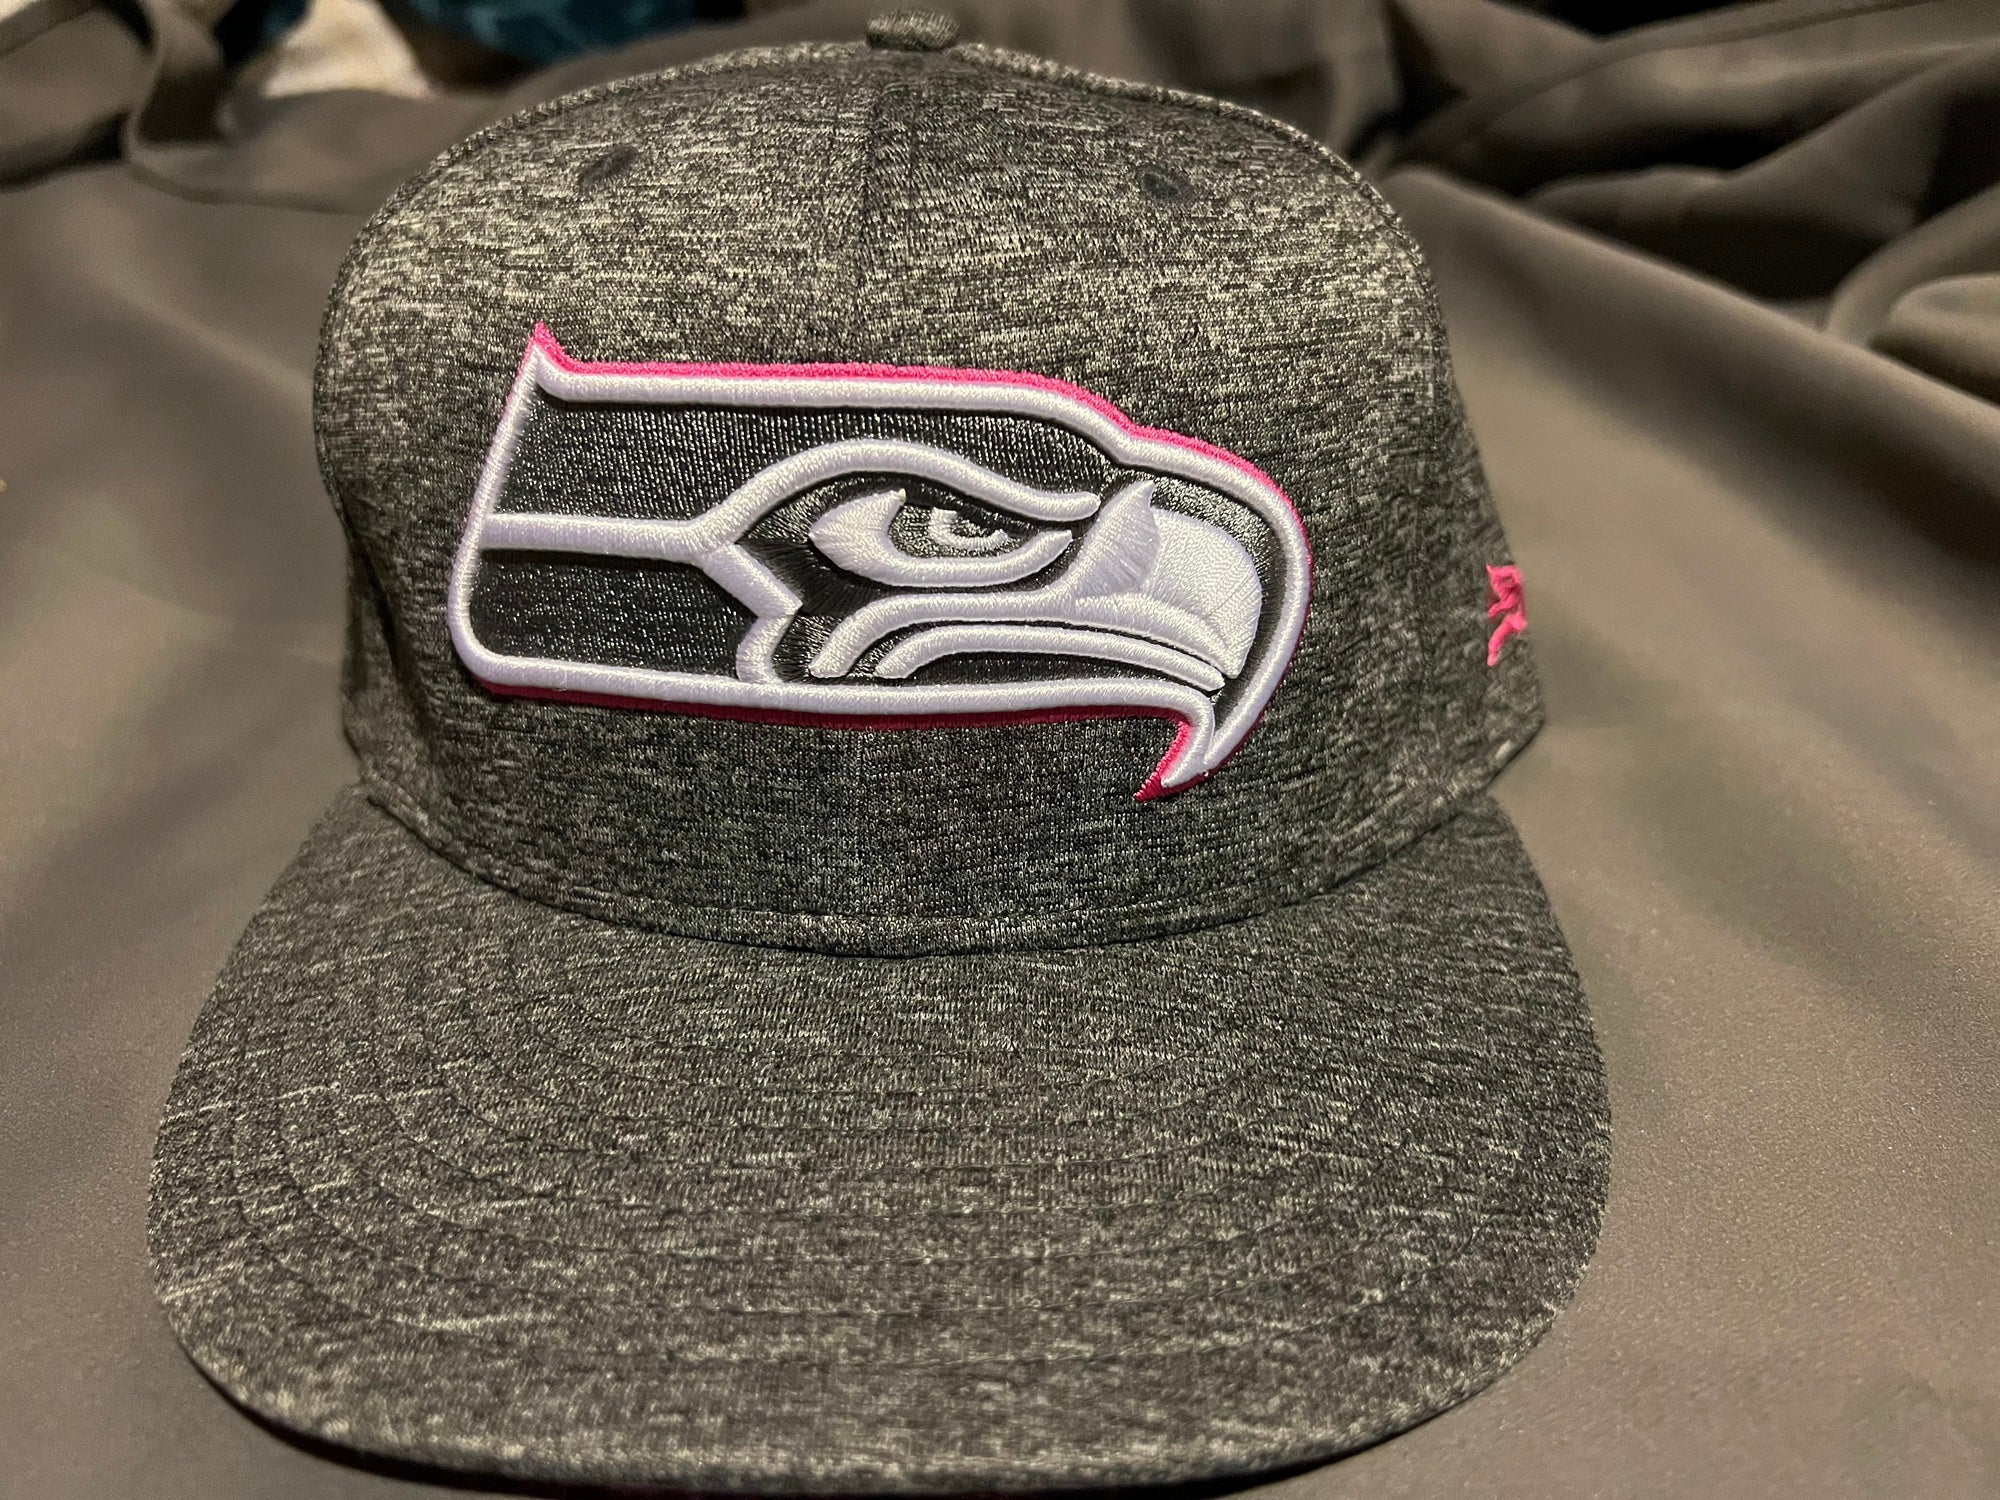 seahawks breast cancer jersey